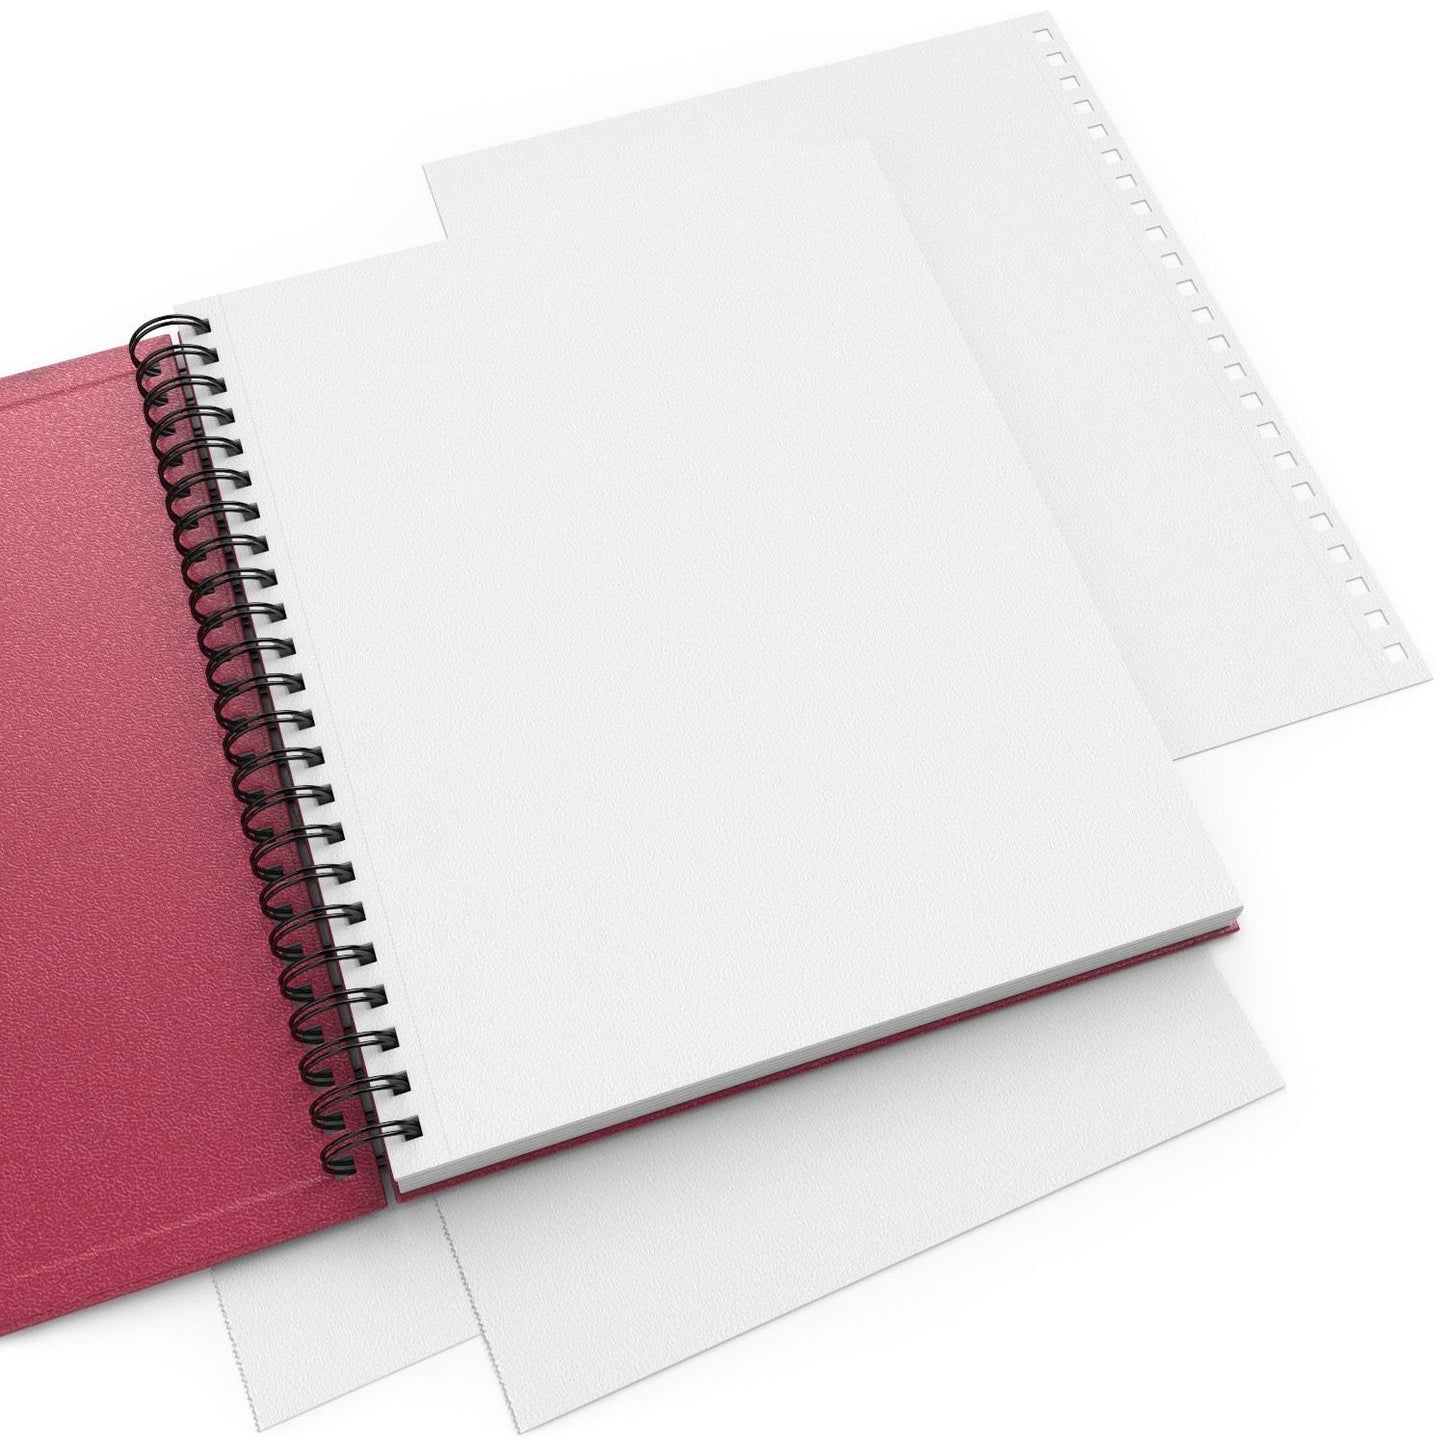 Watercolor Book, Spiral-Bound Hardcover, Pink, 9" x 12"